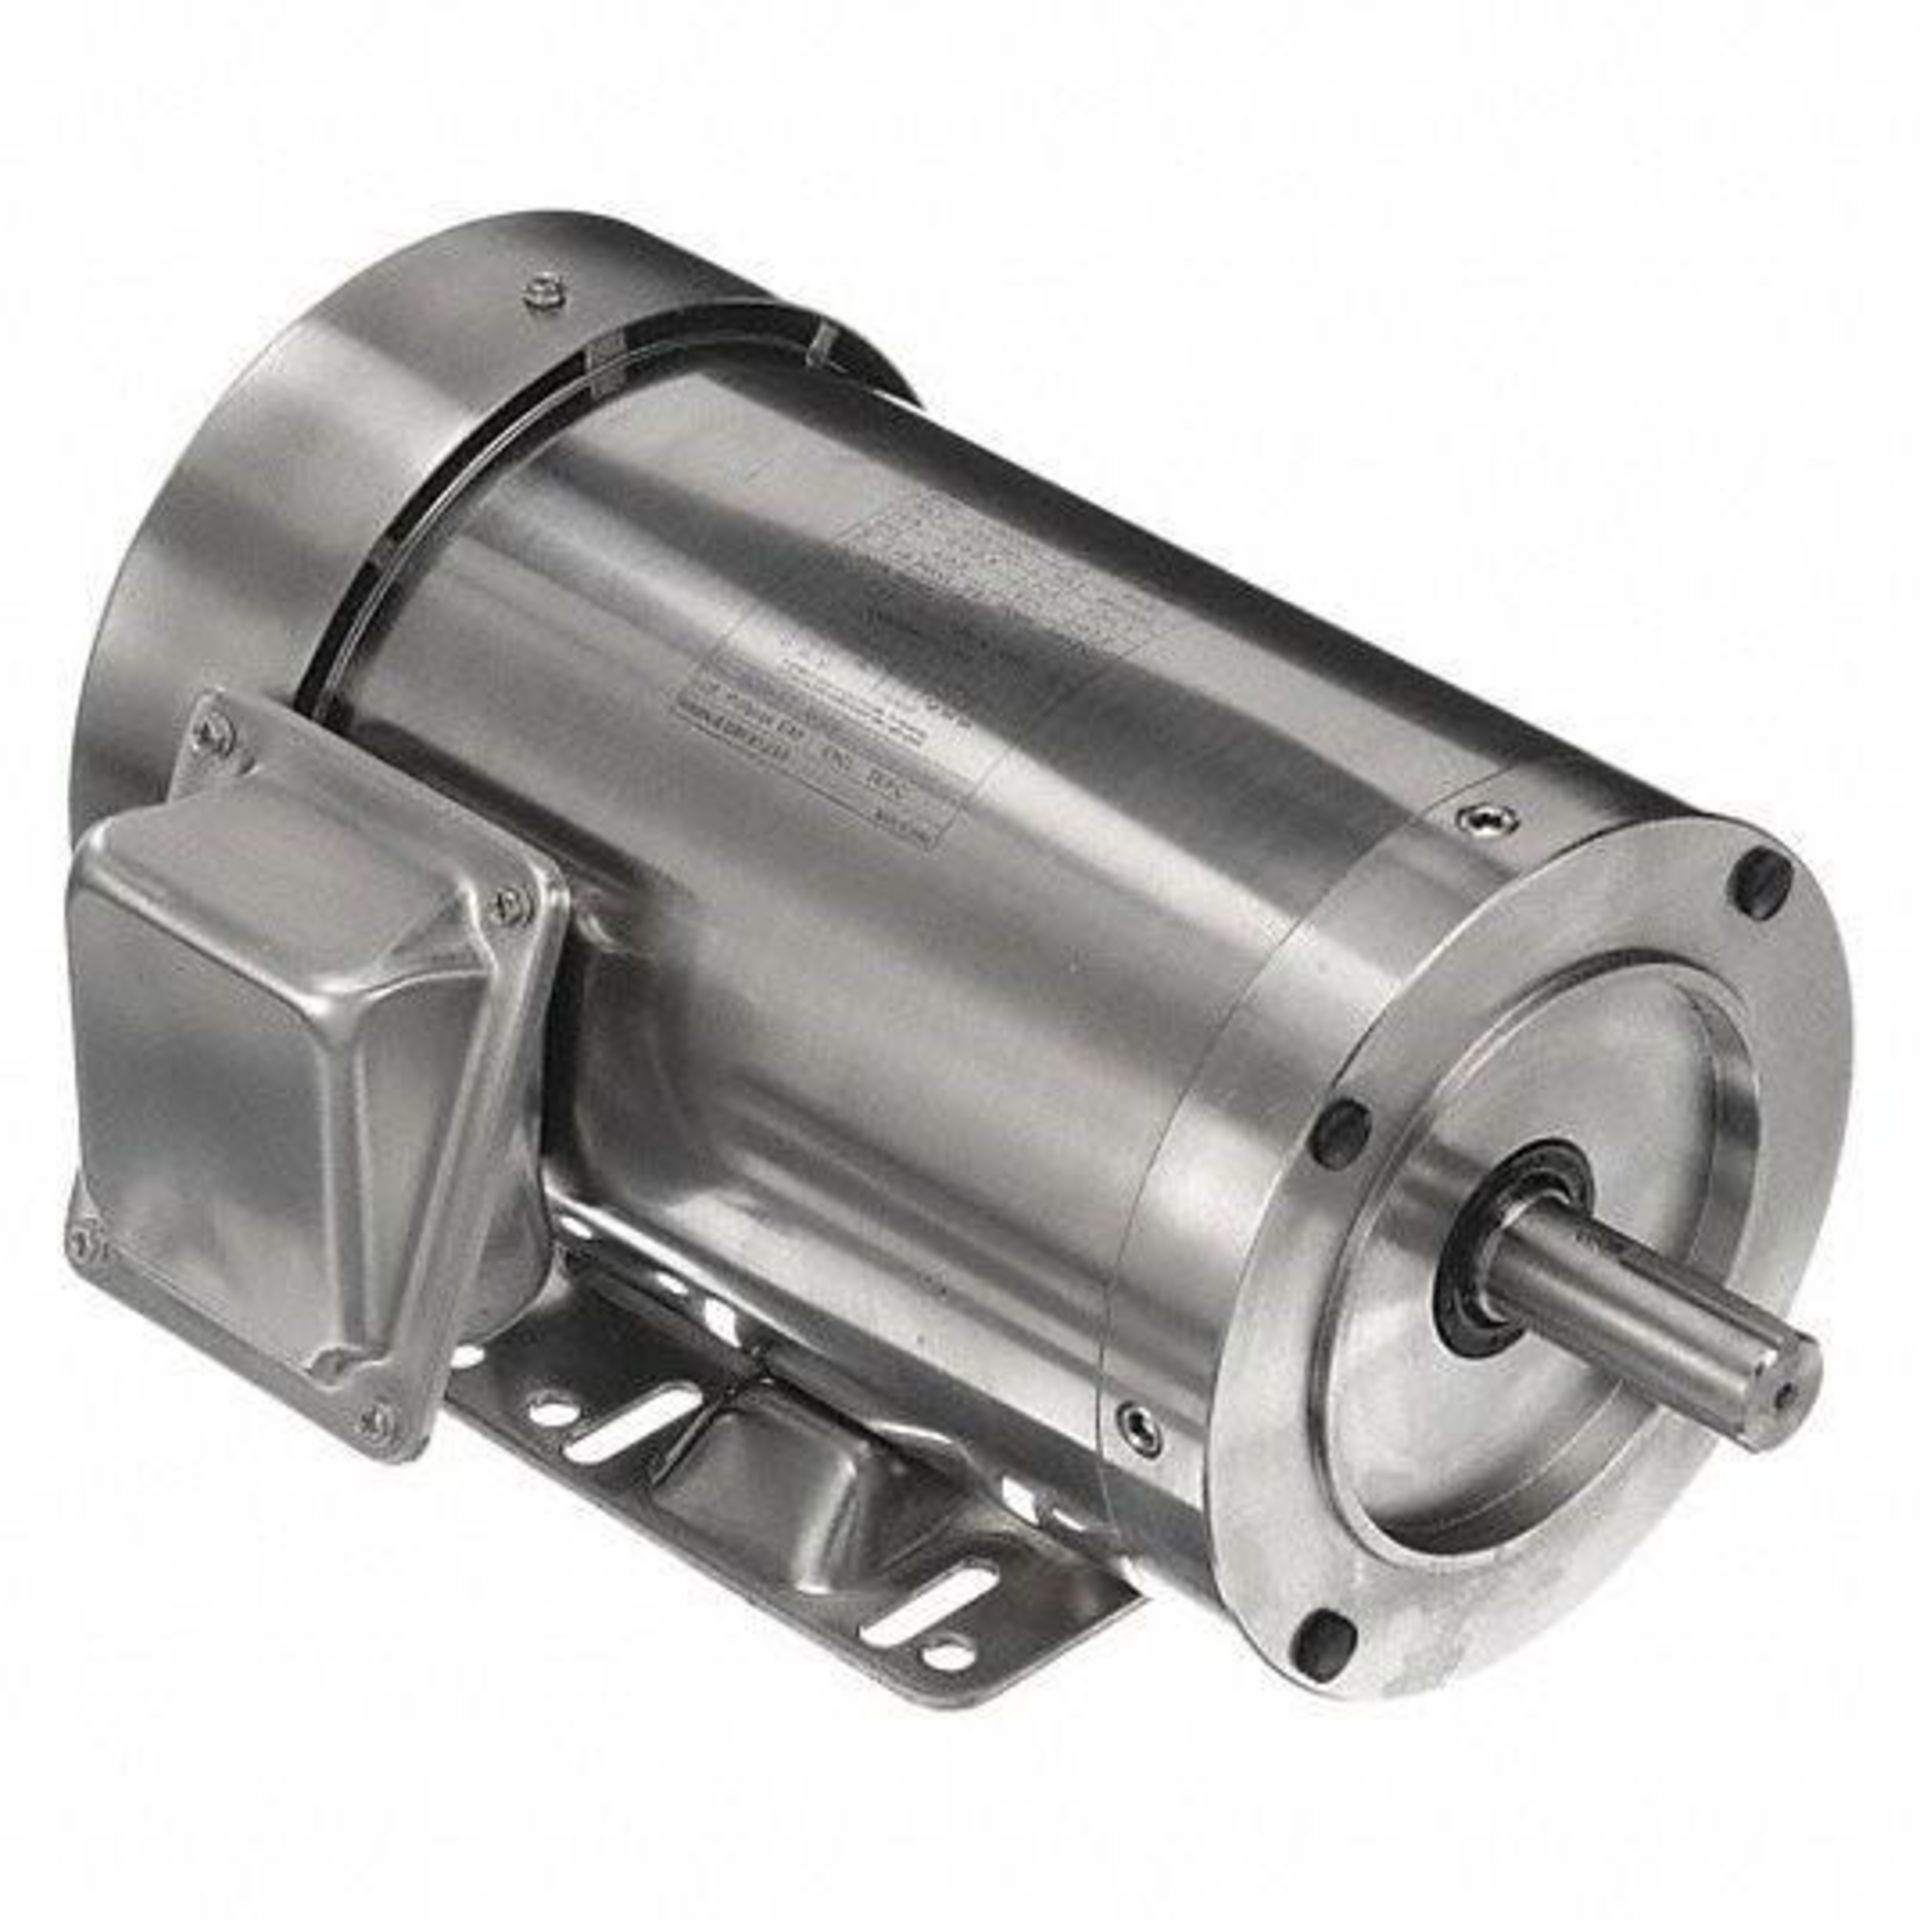 LEESON 1/2 HP 1740 RPM STAINLESS WASHDOWN SST MOTOR (NEW) BRAND/MODEL: LEESON C6T17NC329A INFORMATIO